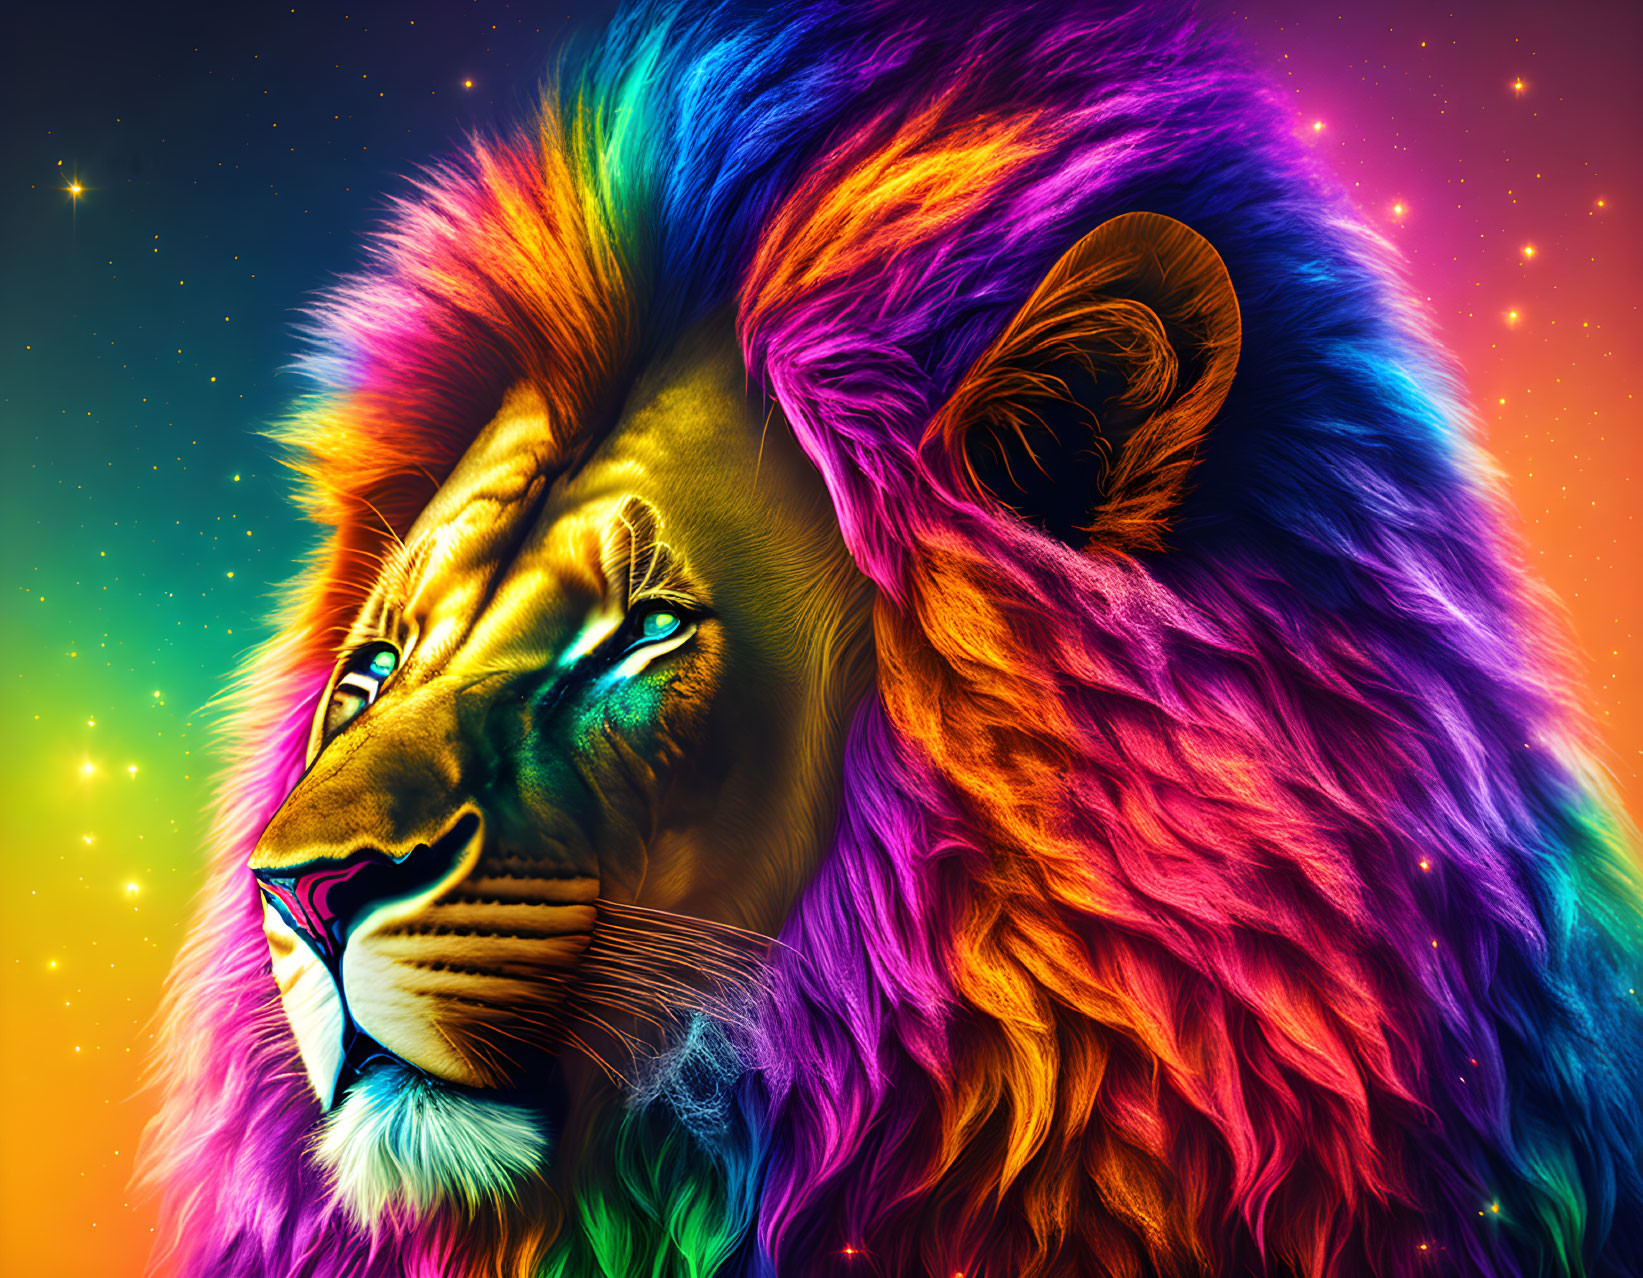 Colorful Lion with Rainbow Mane on Starry Background